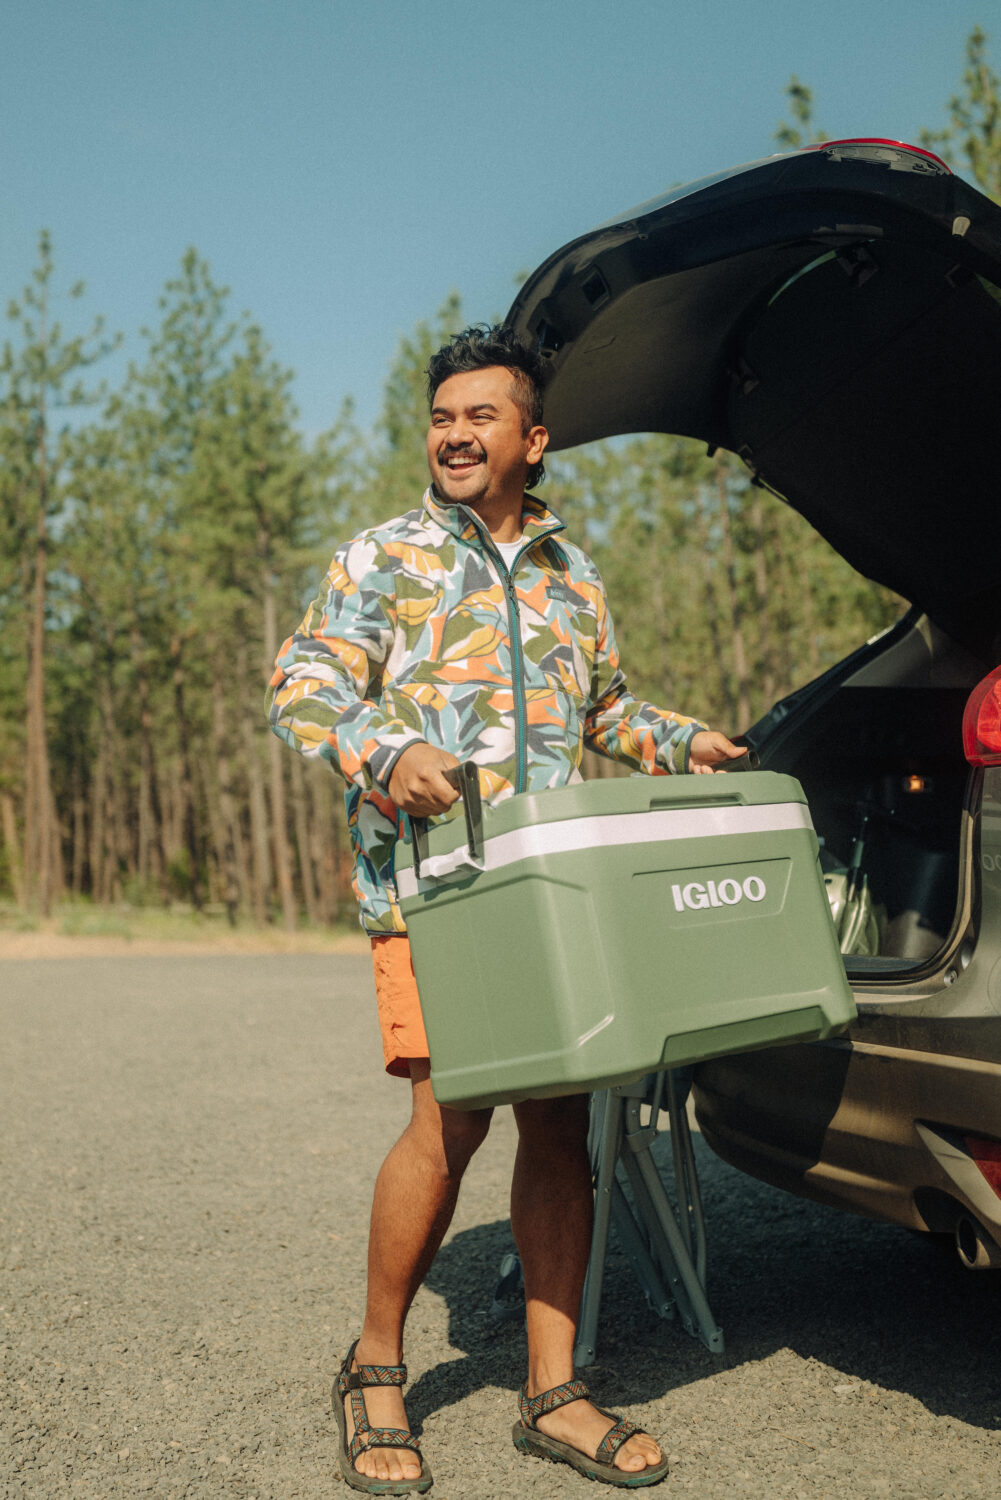 Berty Mandagie holding a green igloo cooler, pulling it from the trunk of a car. He is smiling and ready for a day at the beach